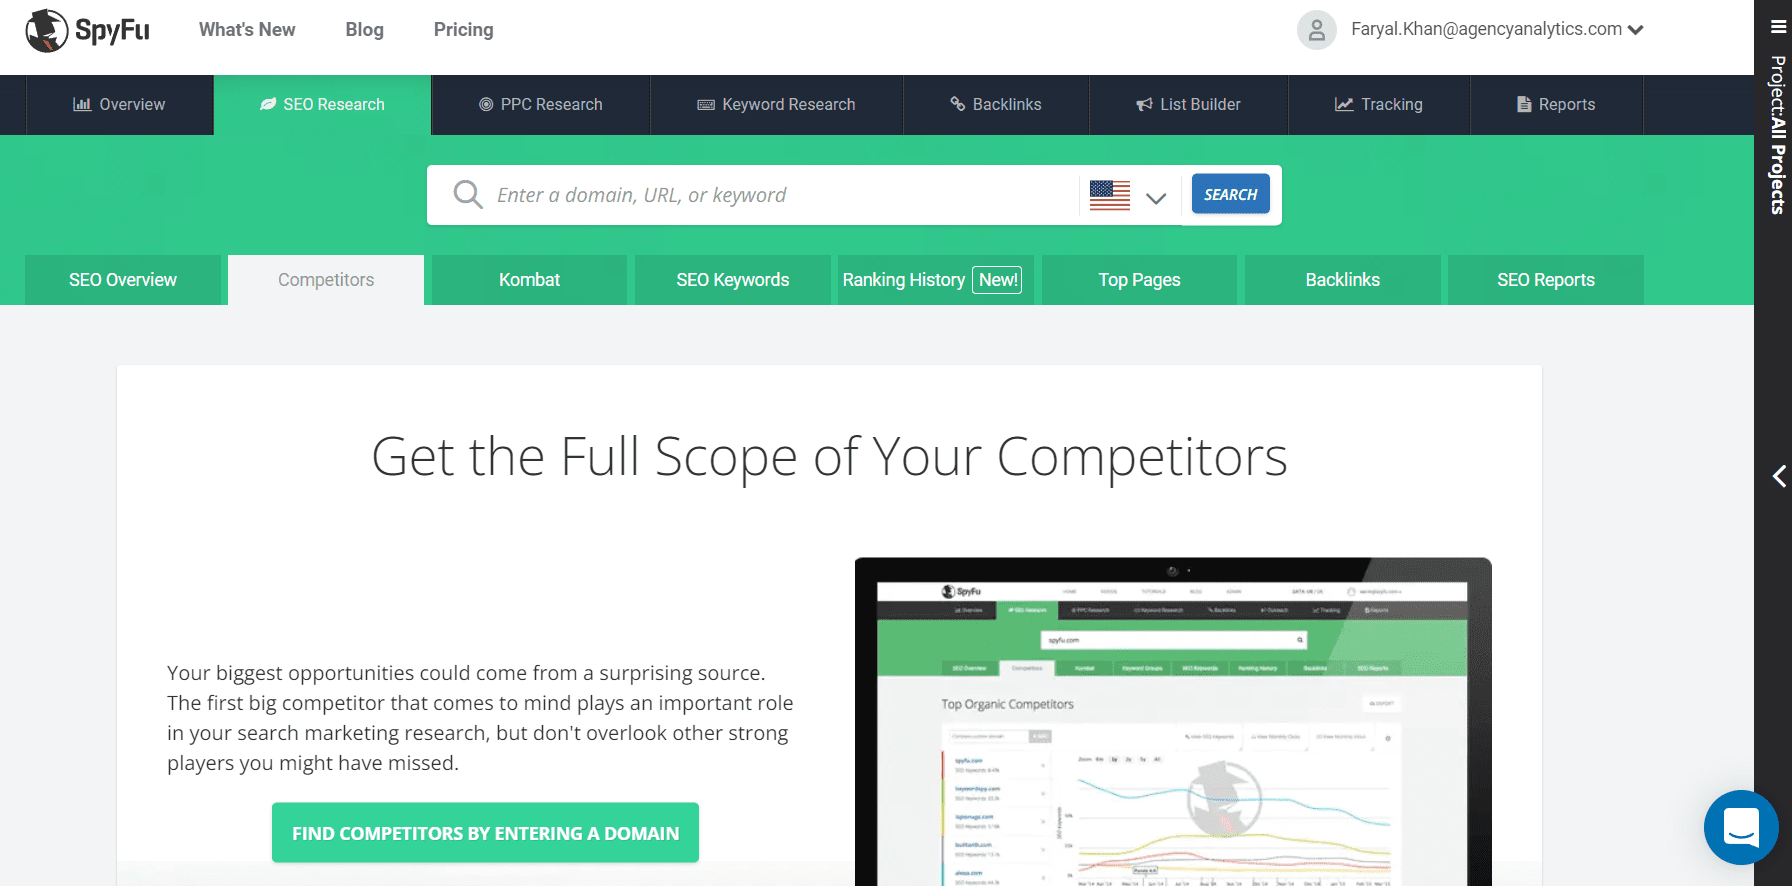 spy on your competitors with SpyFu